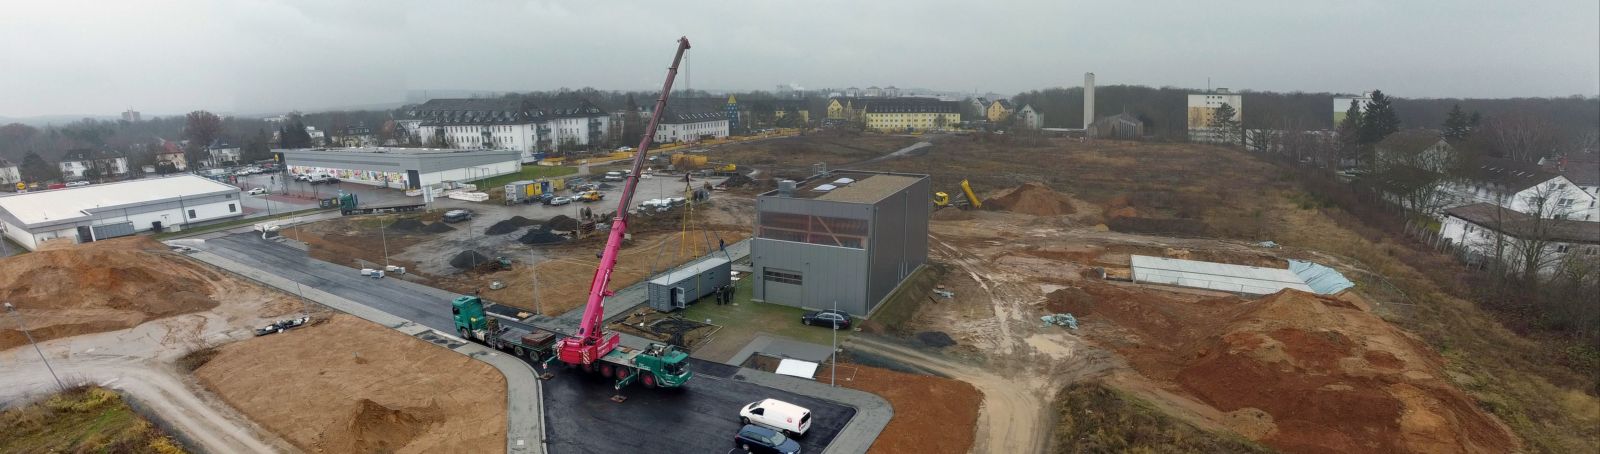 An energy-efficient new development district that will serve the grid is being built in Gießen. The image shows the delivery of the battery storage system.